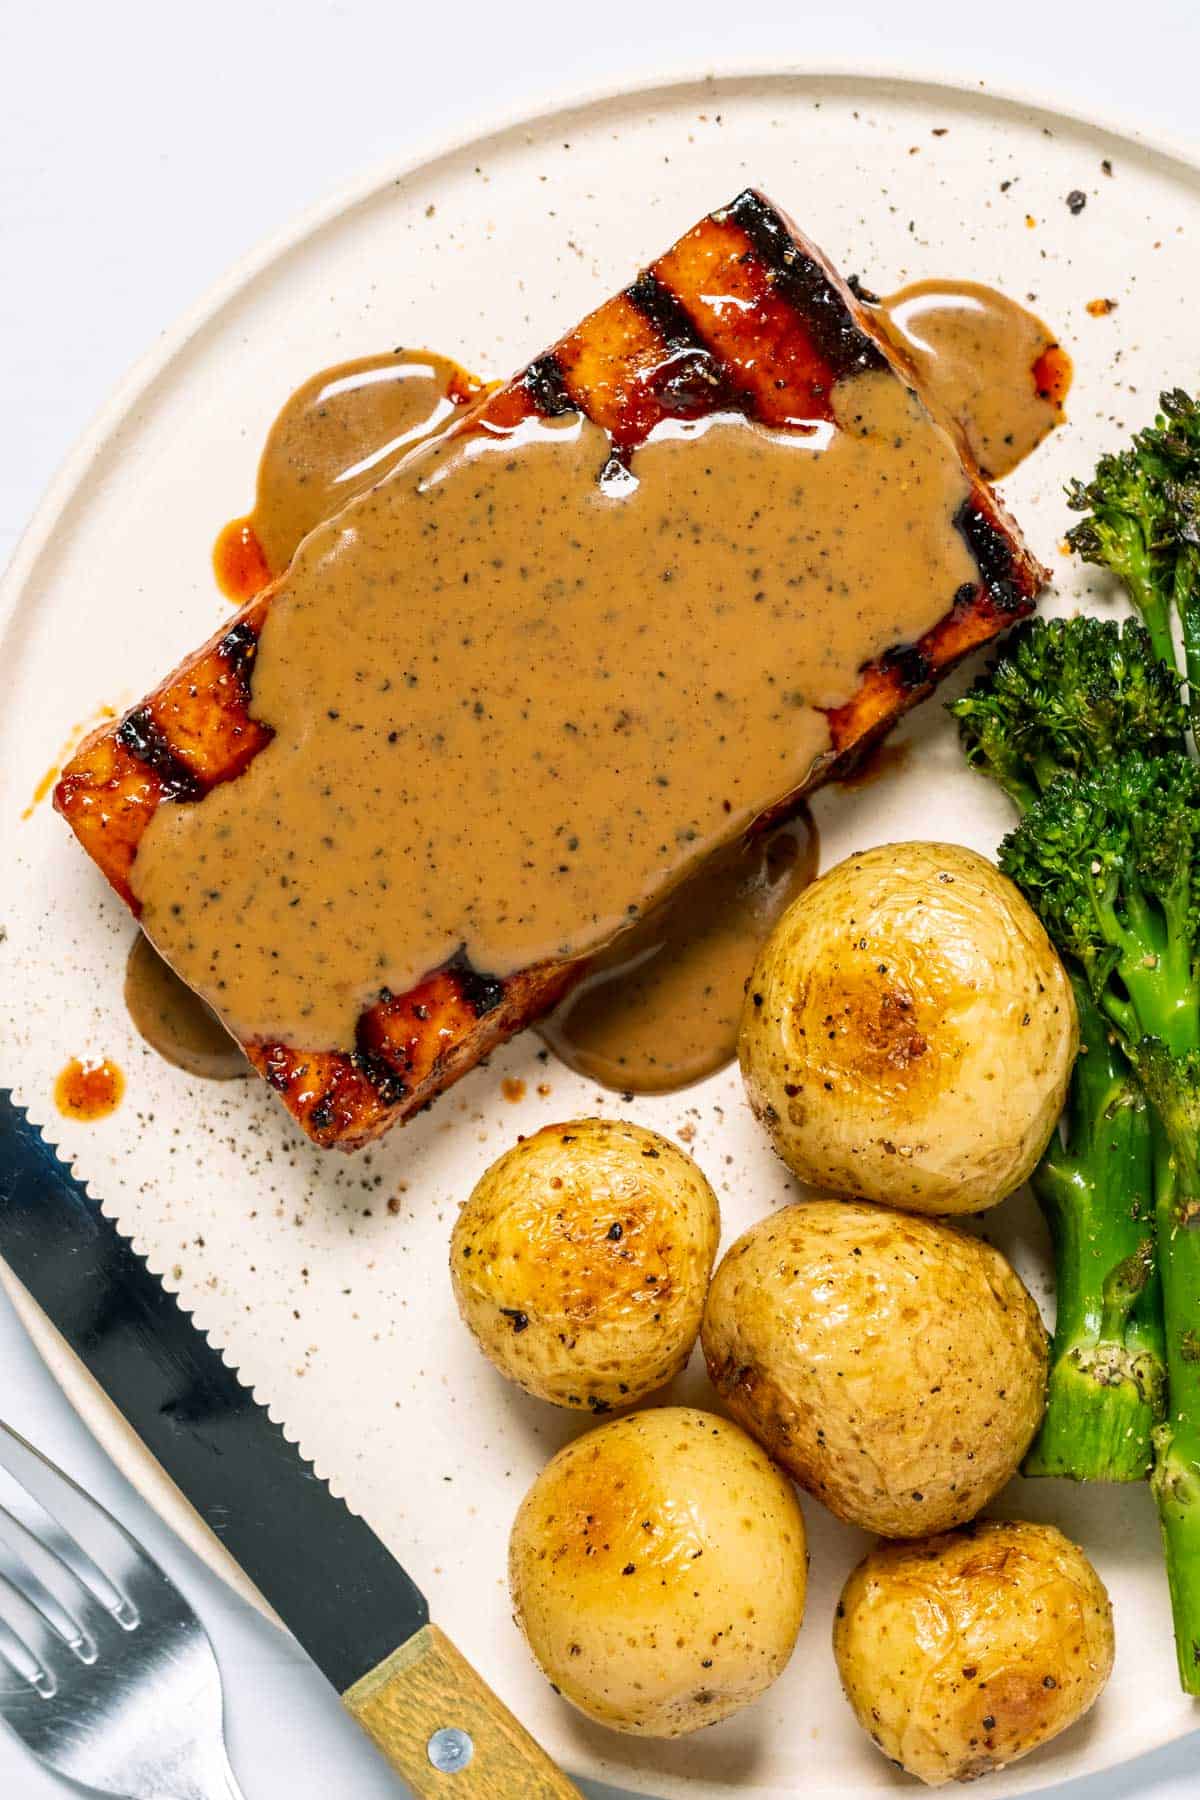 Tofu steak topped with peppercorn sauce on a white plate with baby potatoes and broccoli.